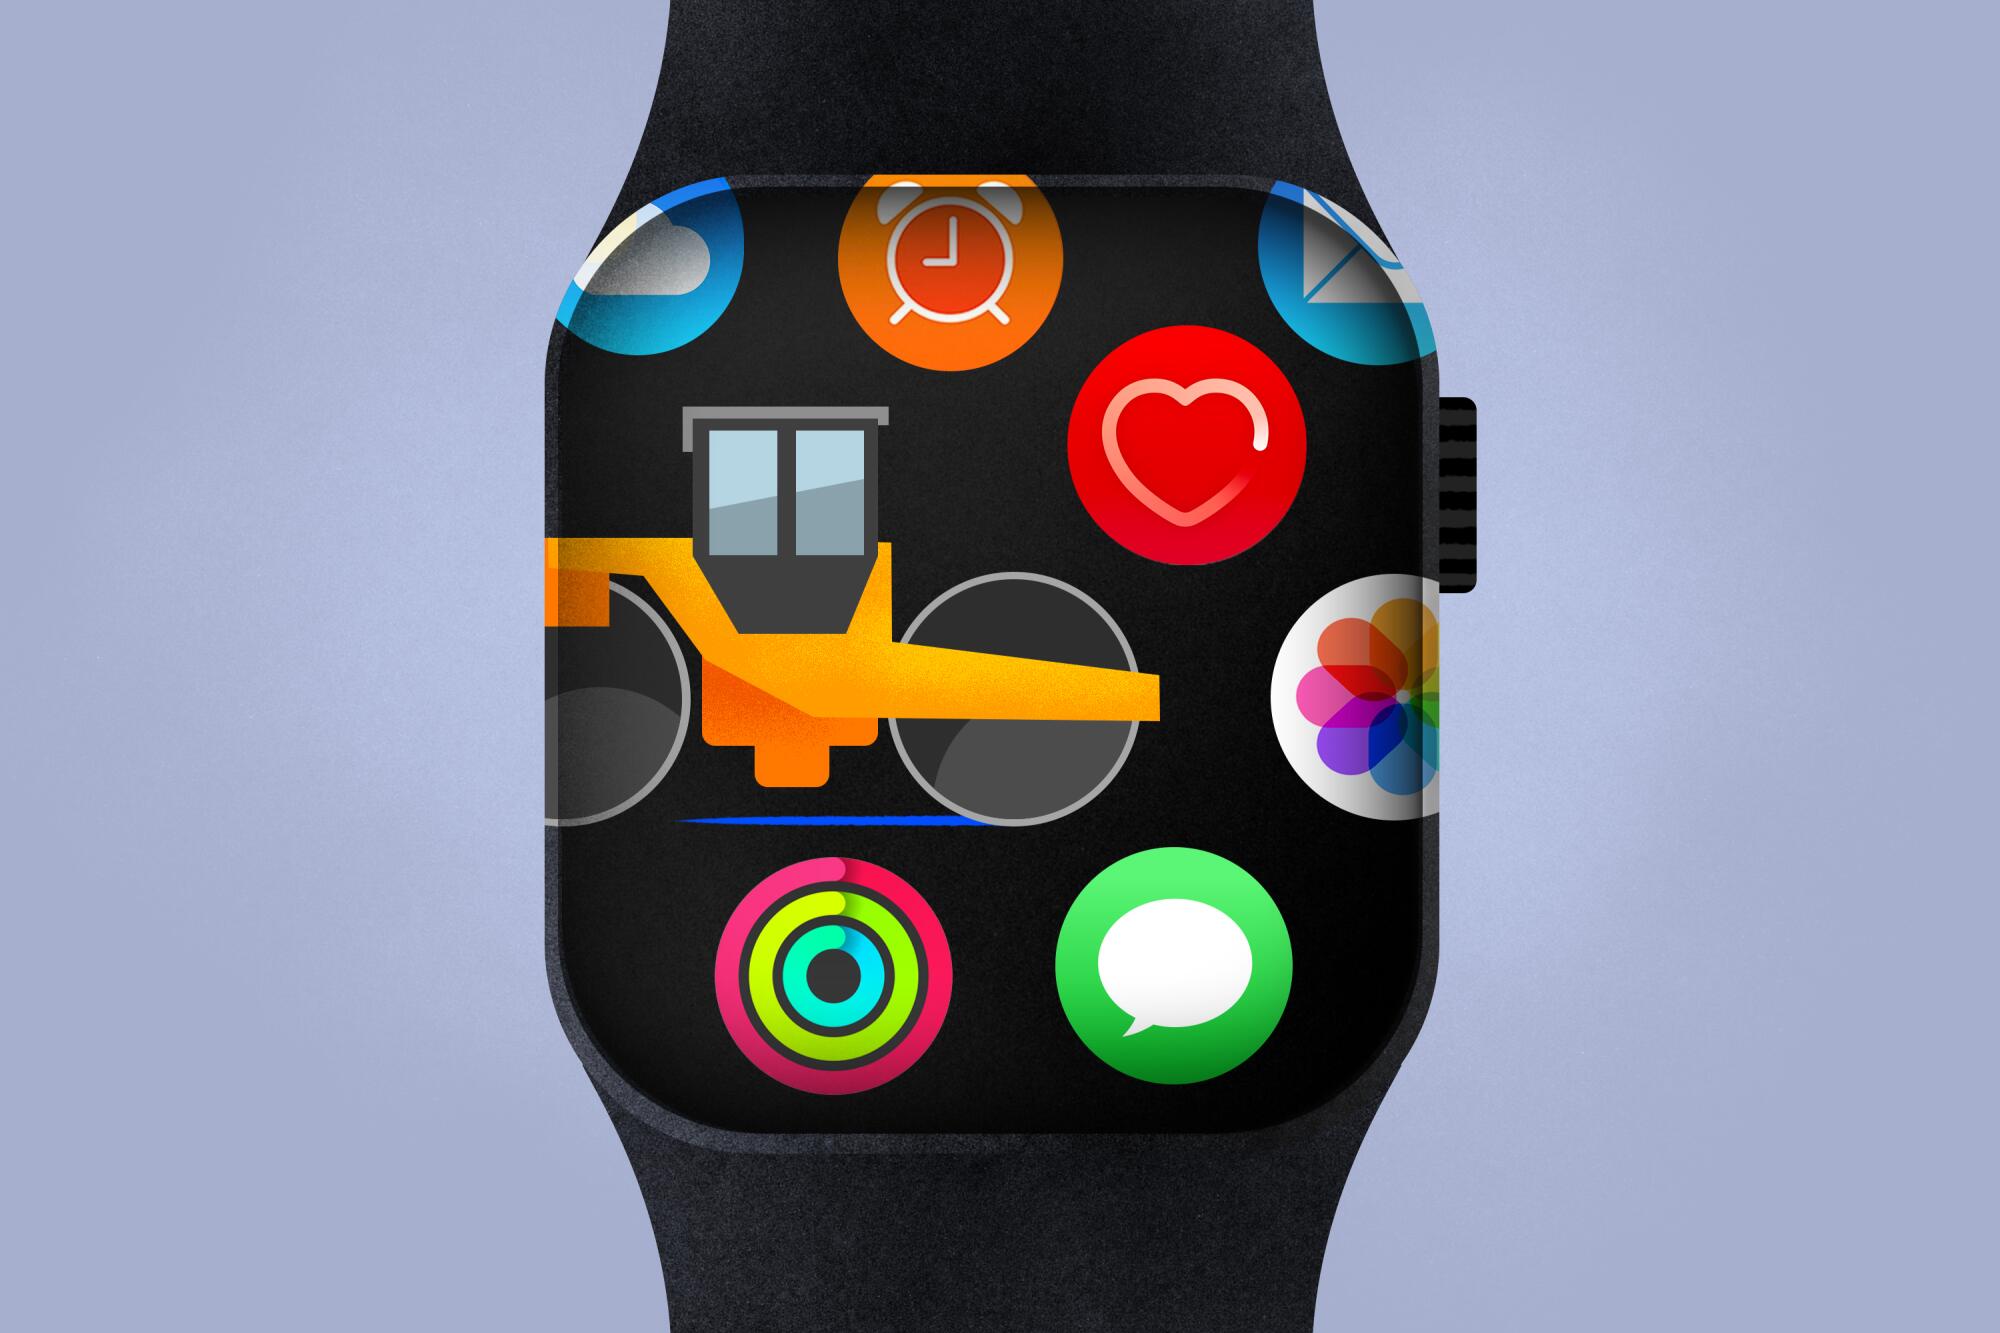 An illustration shows a steamroller amid icons on a smartwatch.